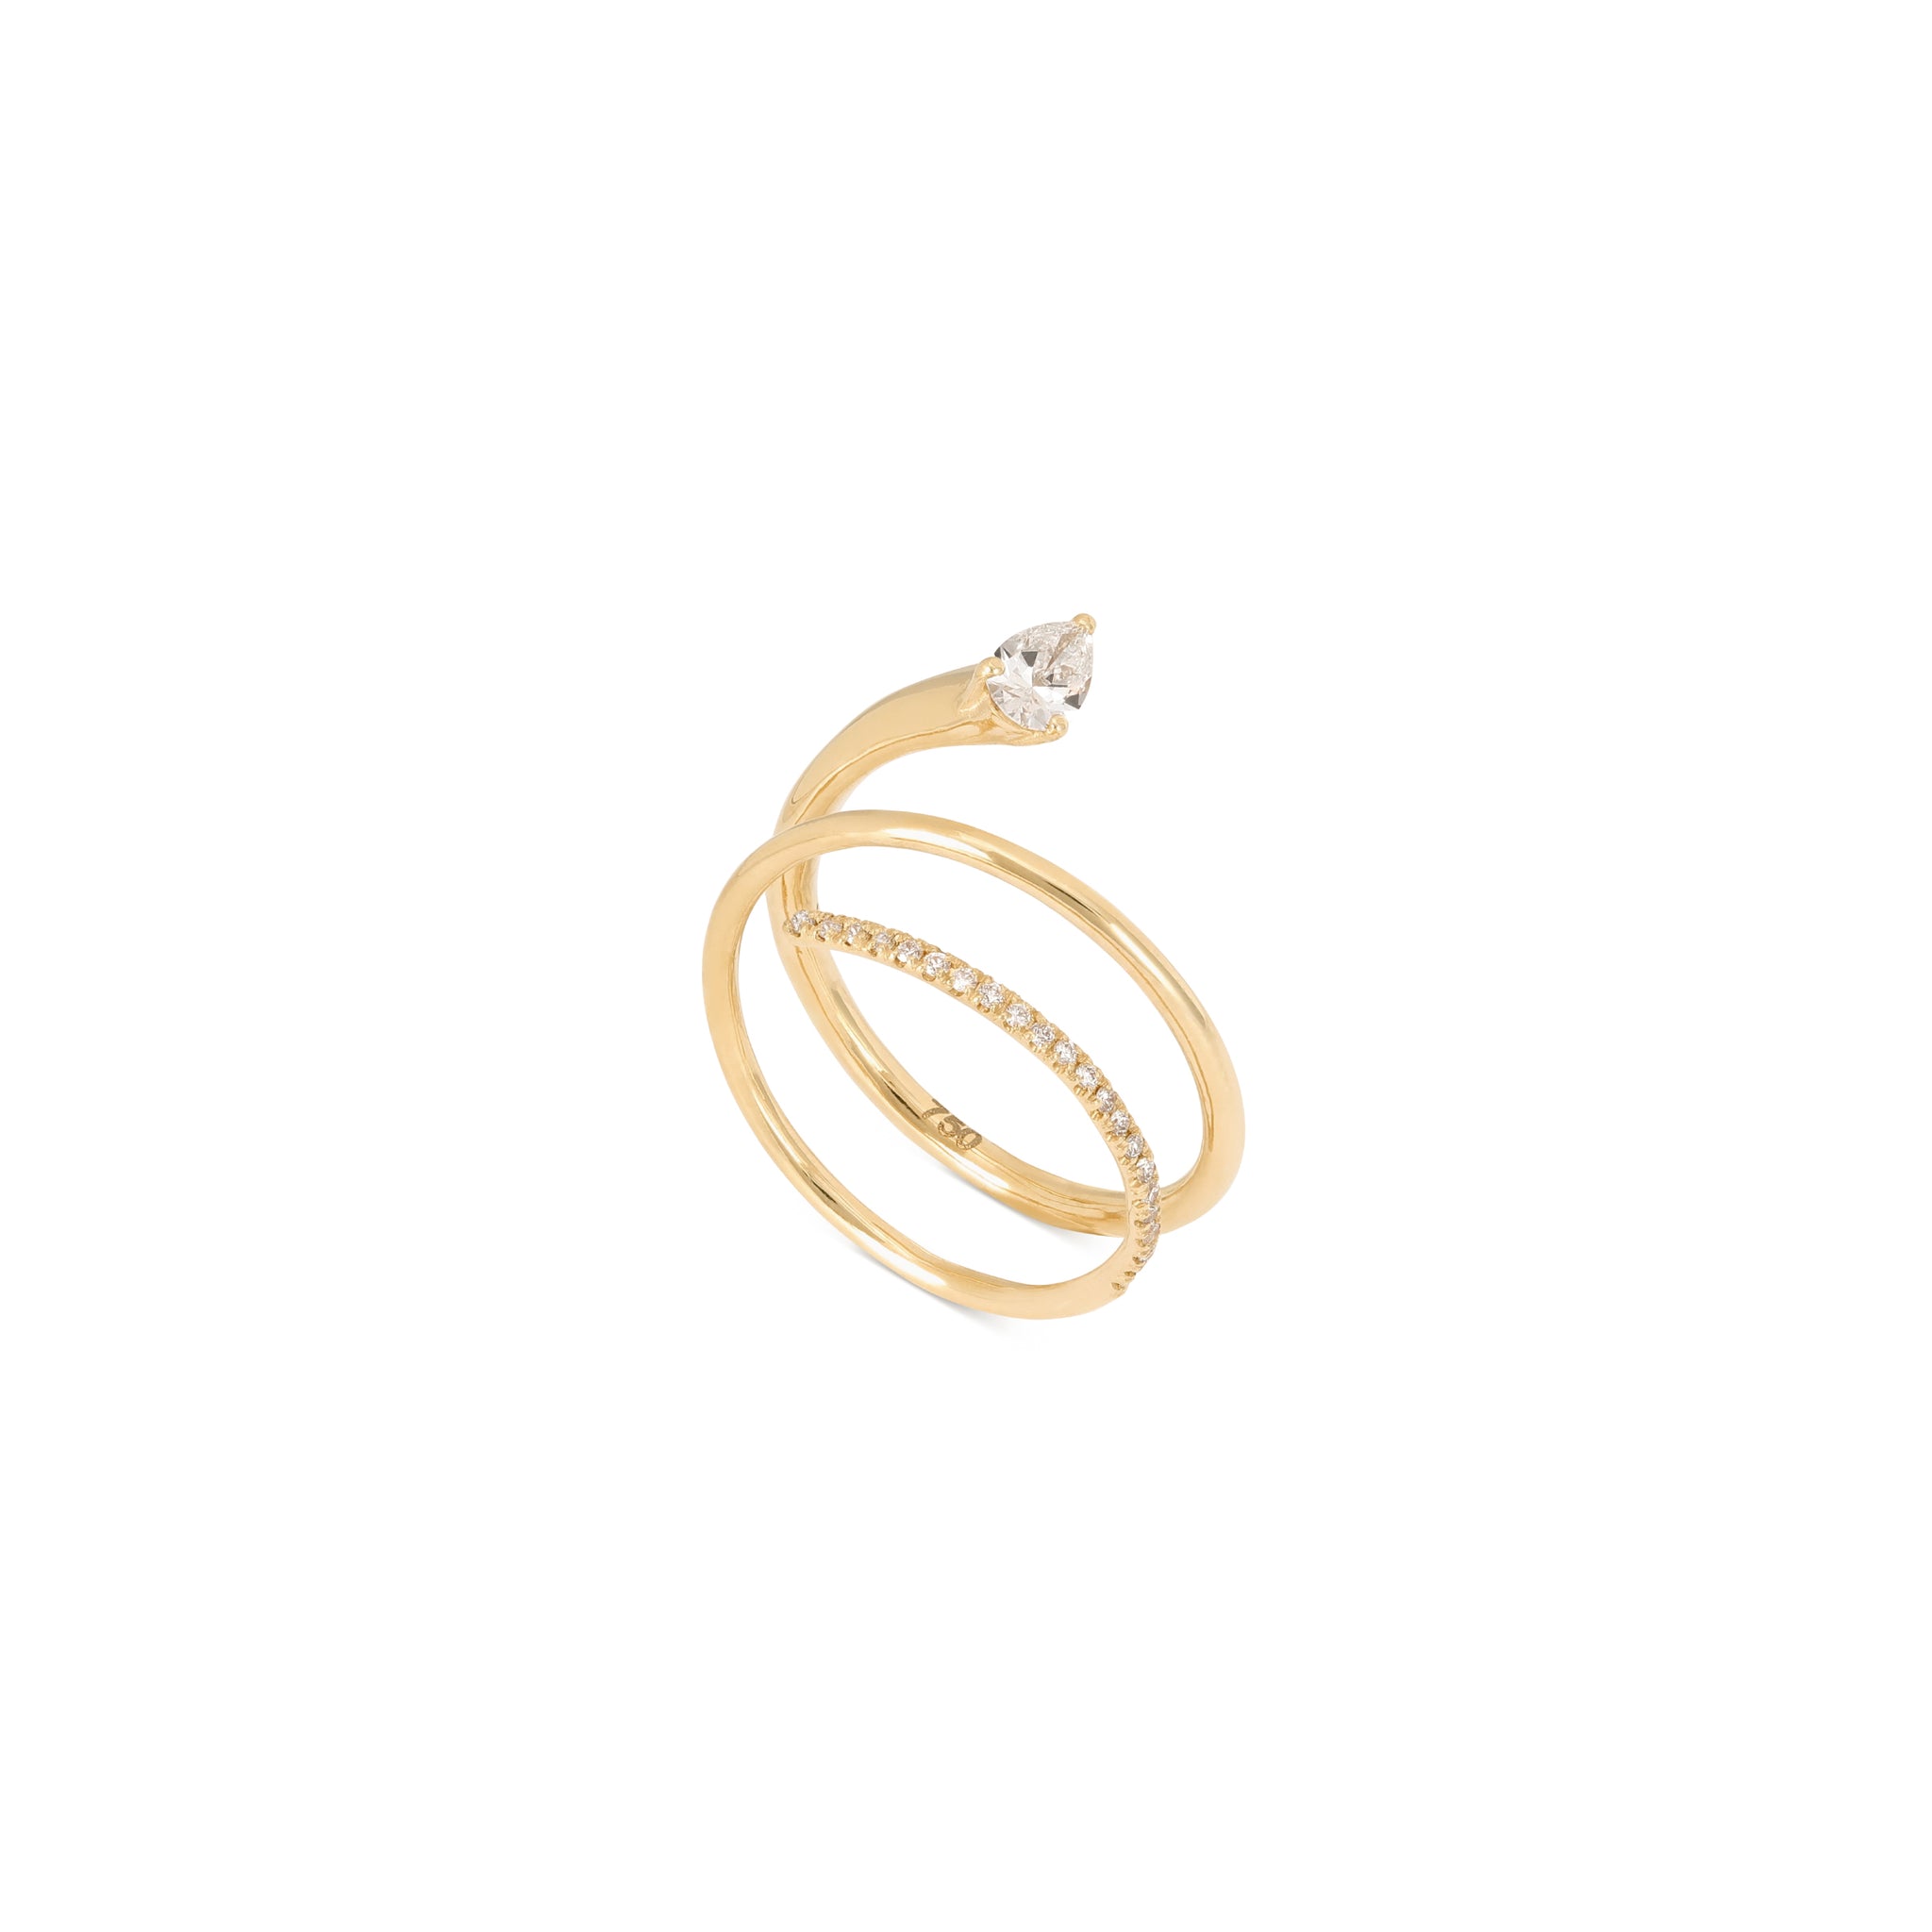 Spiral Diamond Pave Ring in Yellow Gold